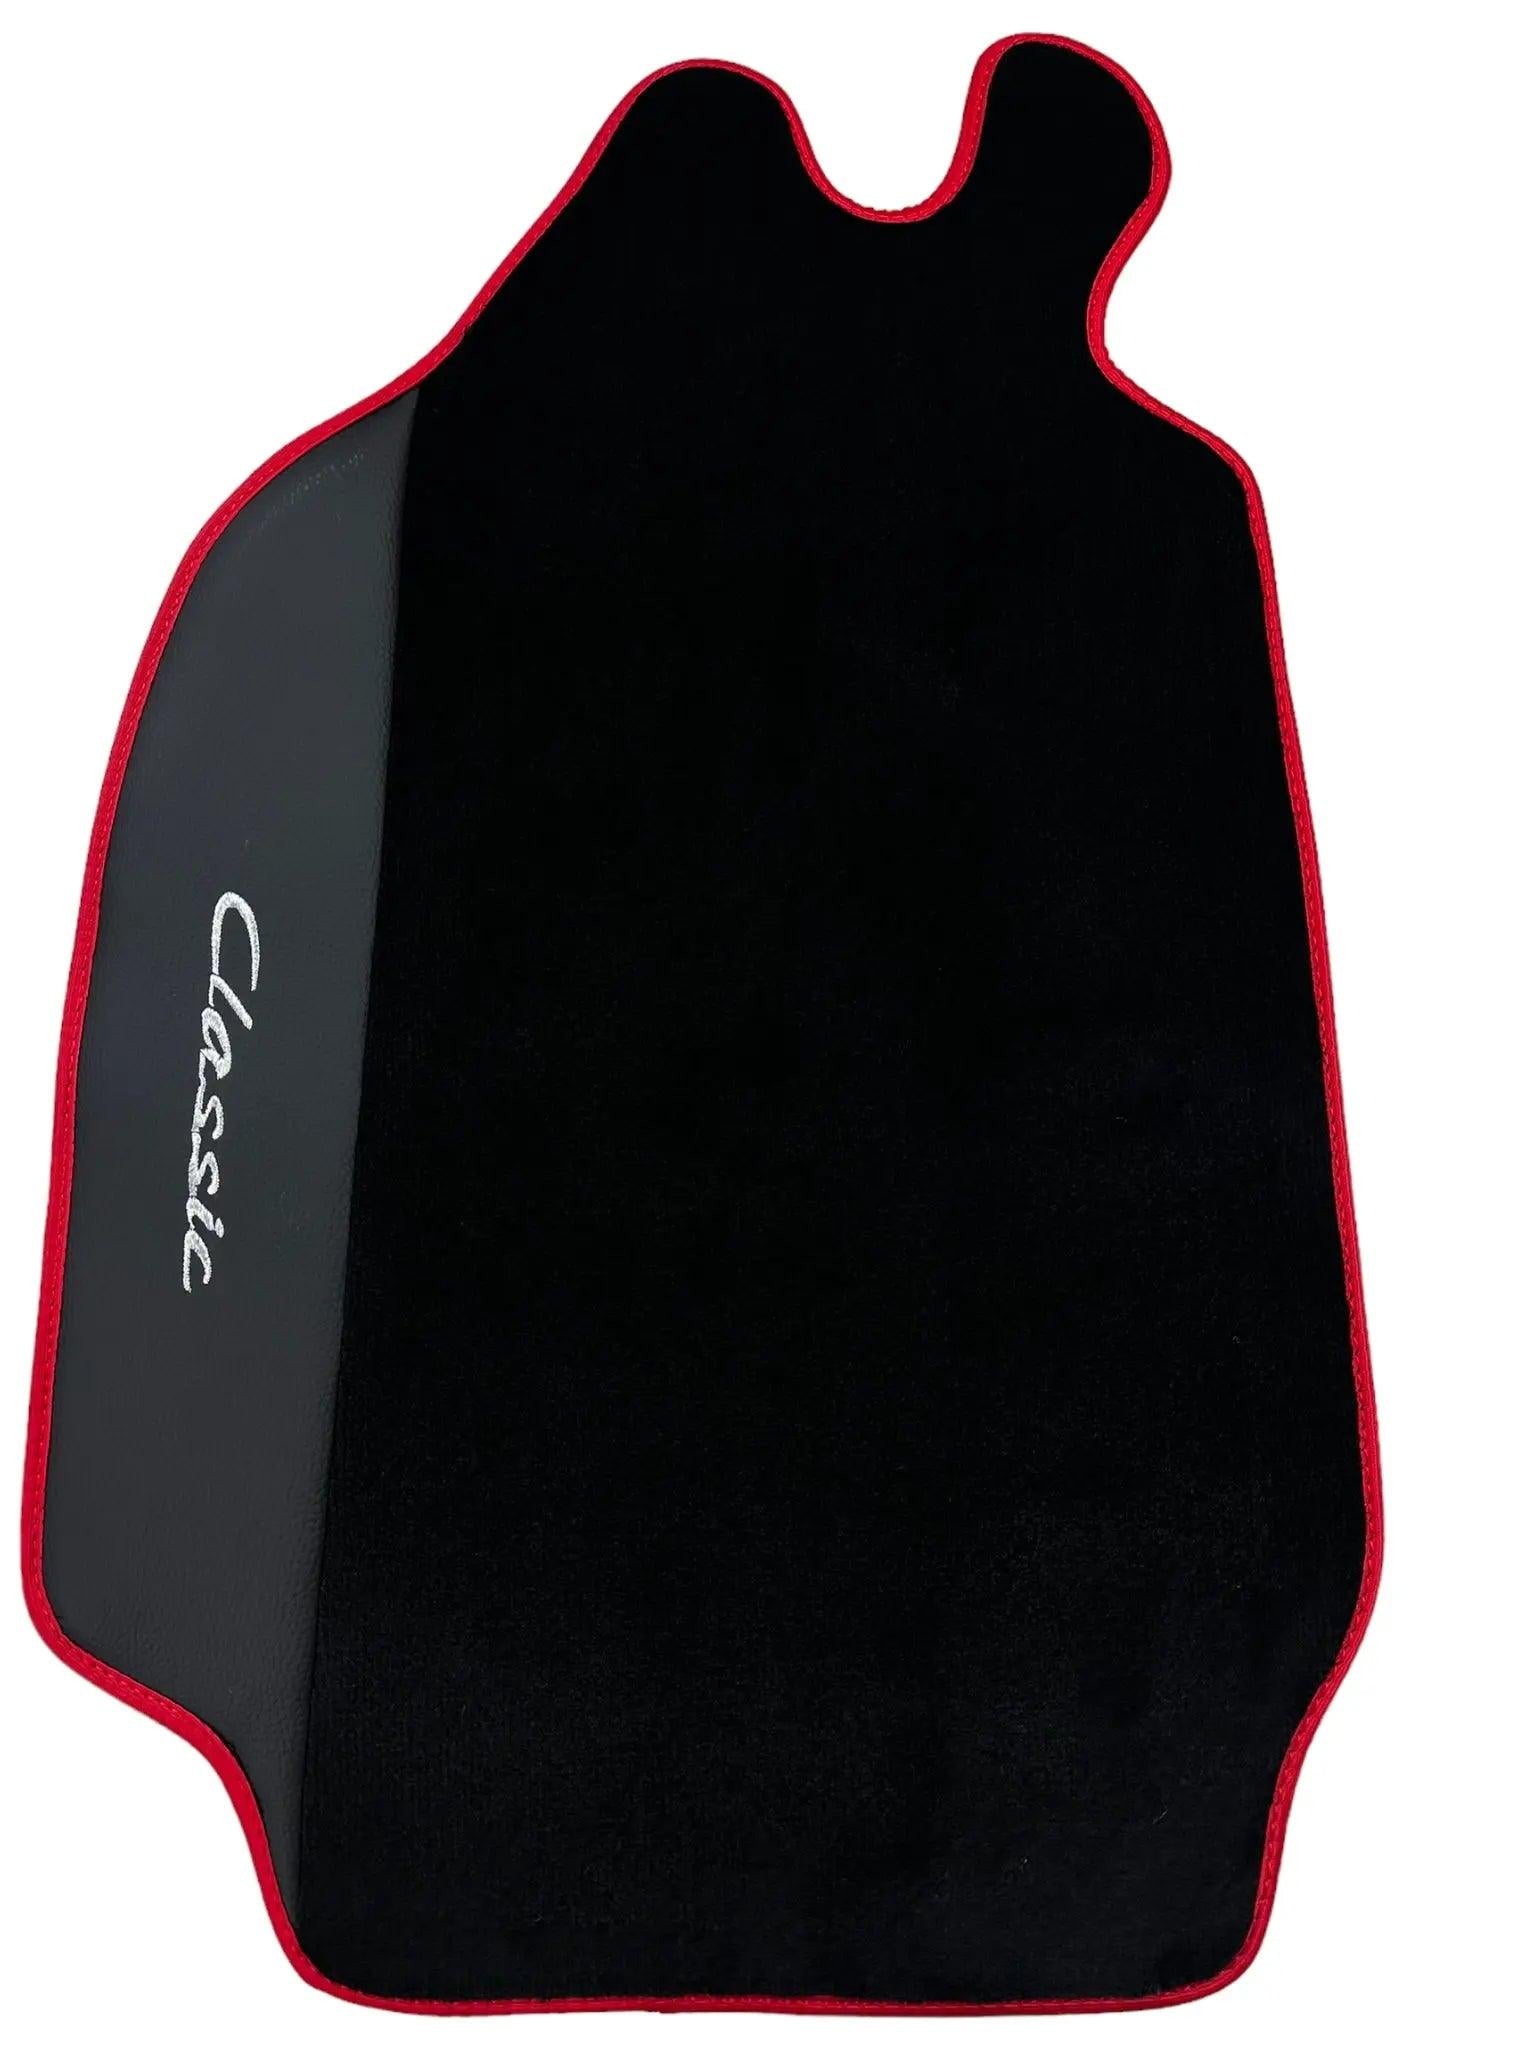 Leather Floor Mats for Porsche Classic 911 (1963-1989) with Red Trim